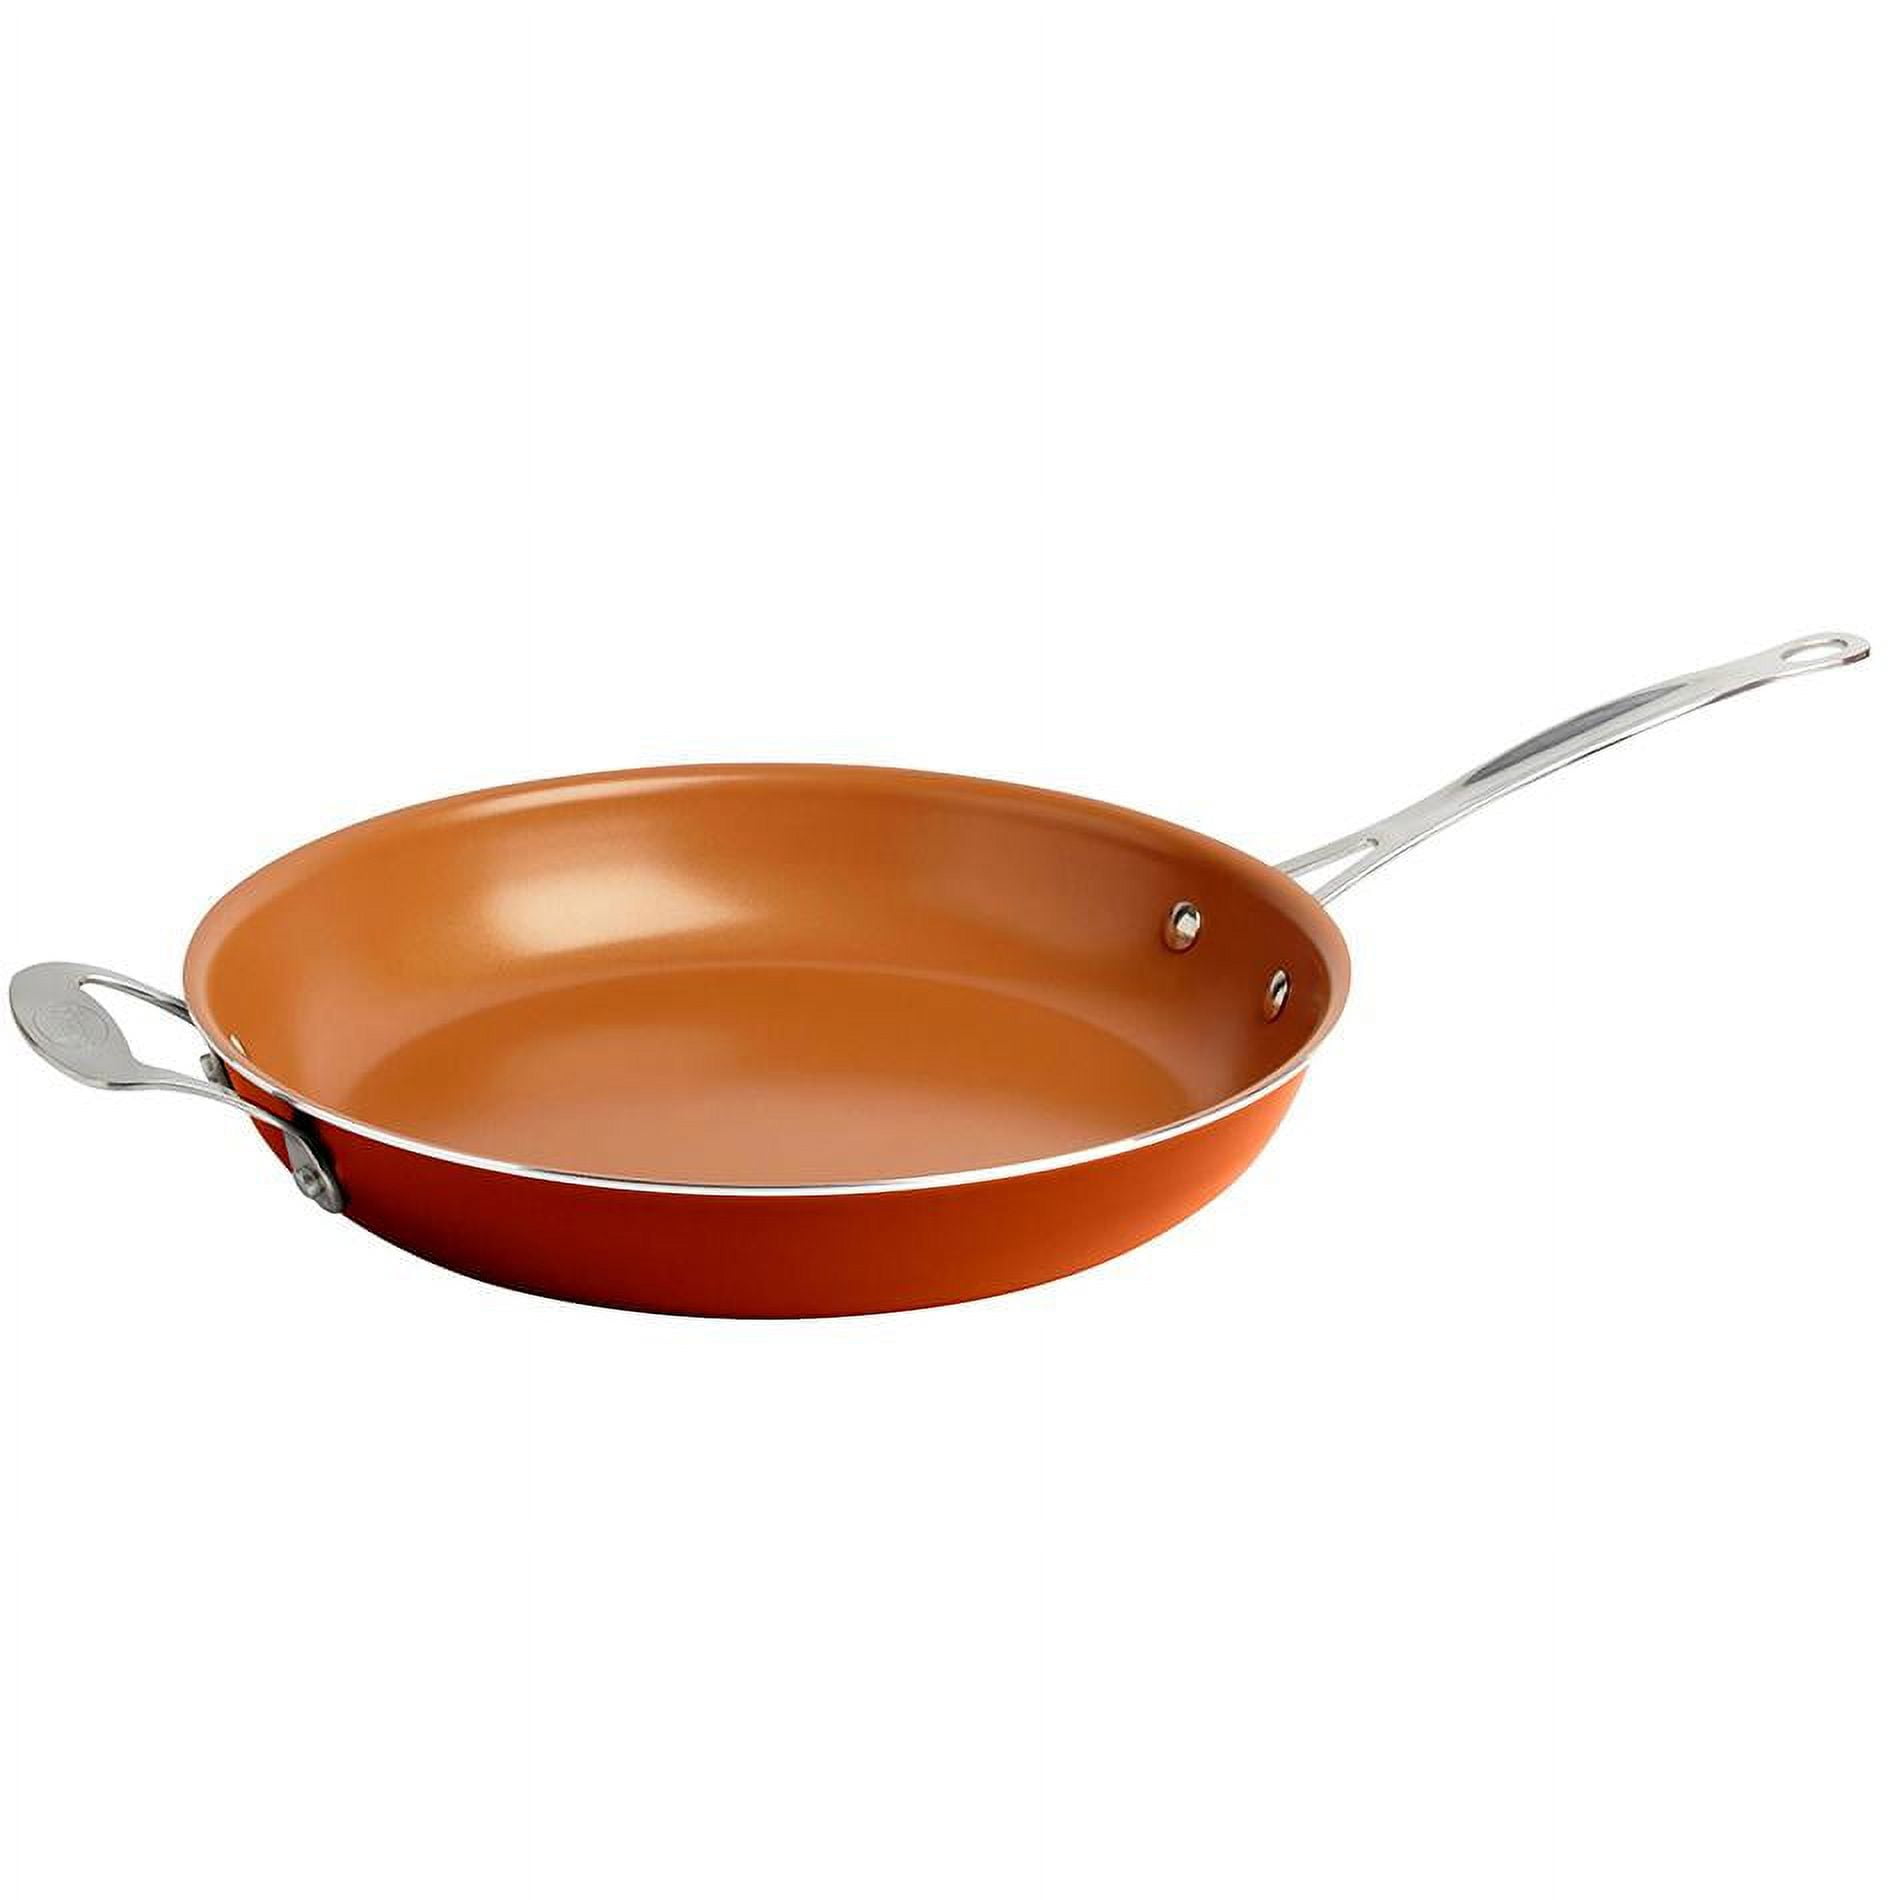 Orange Enameled Cast Iron Skillet Fry Pan by Nardelli Cookware – Nardelli  Cookware USA